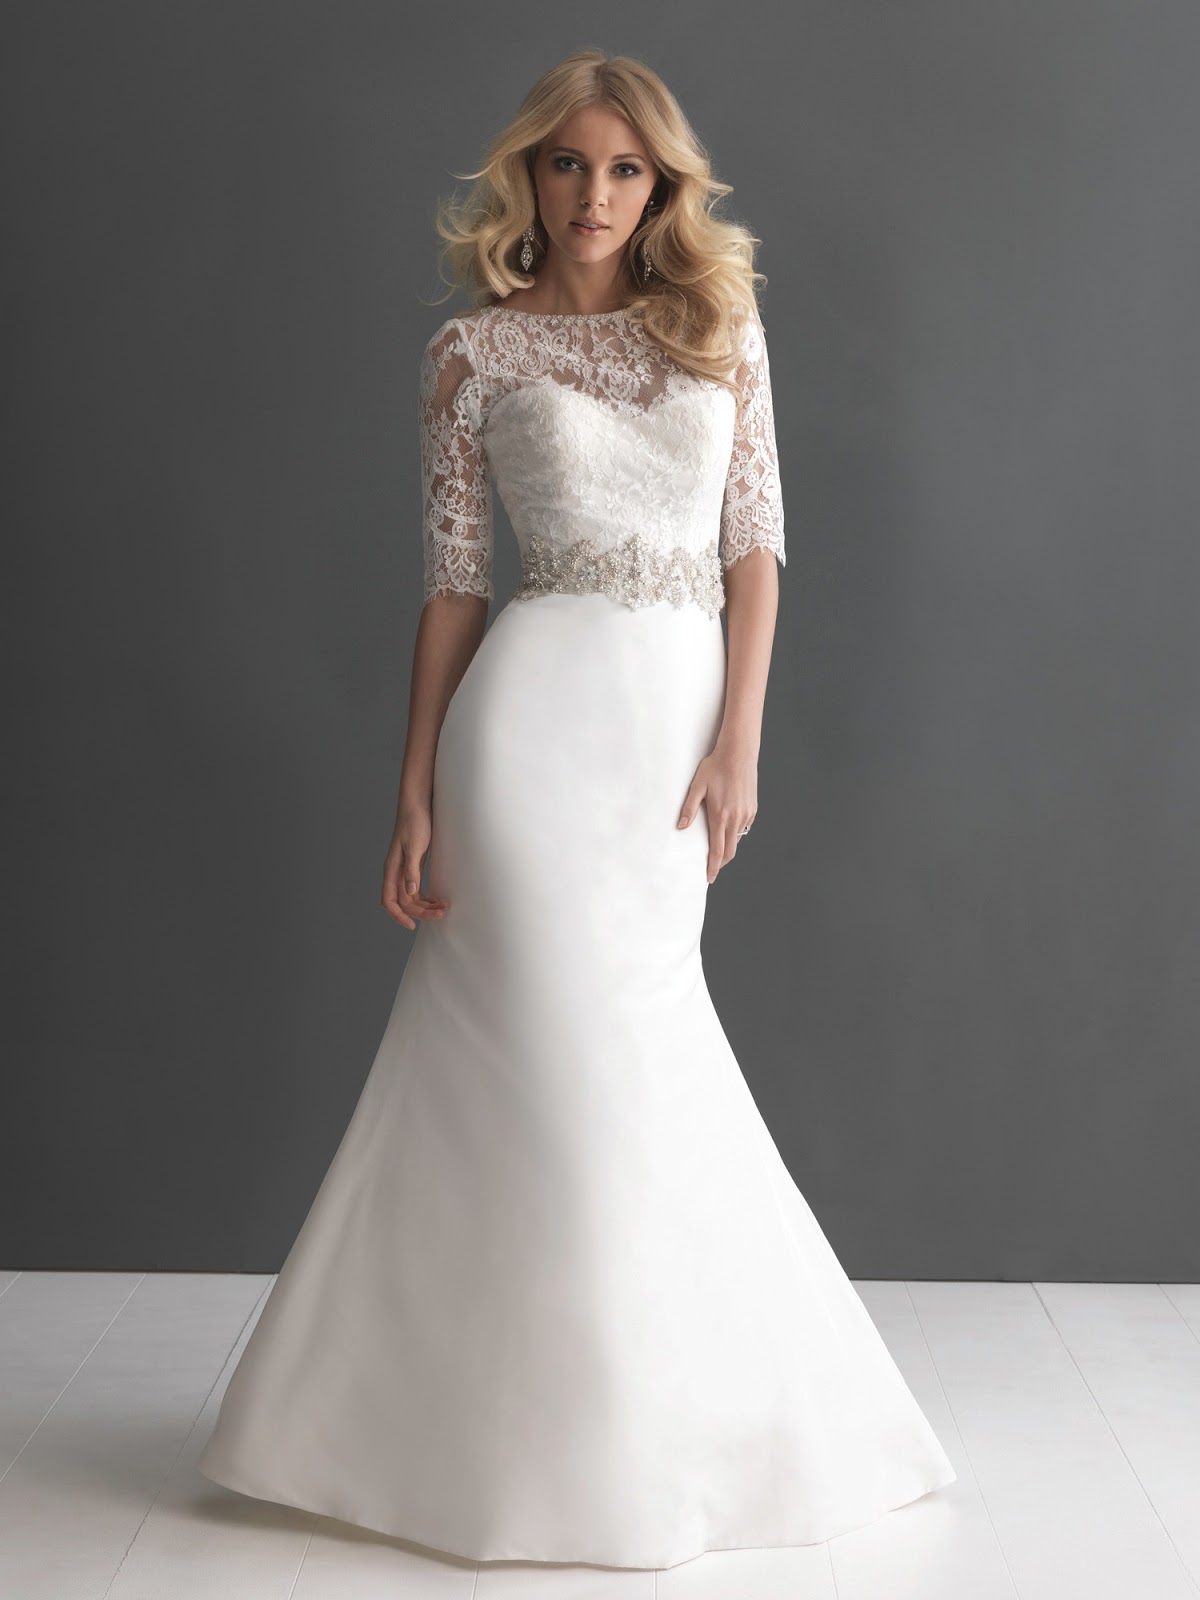 DressyBridal Allure Wedding  Dresses  Fall 2013 Collection